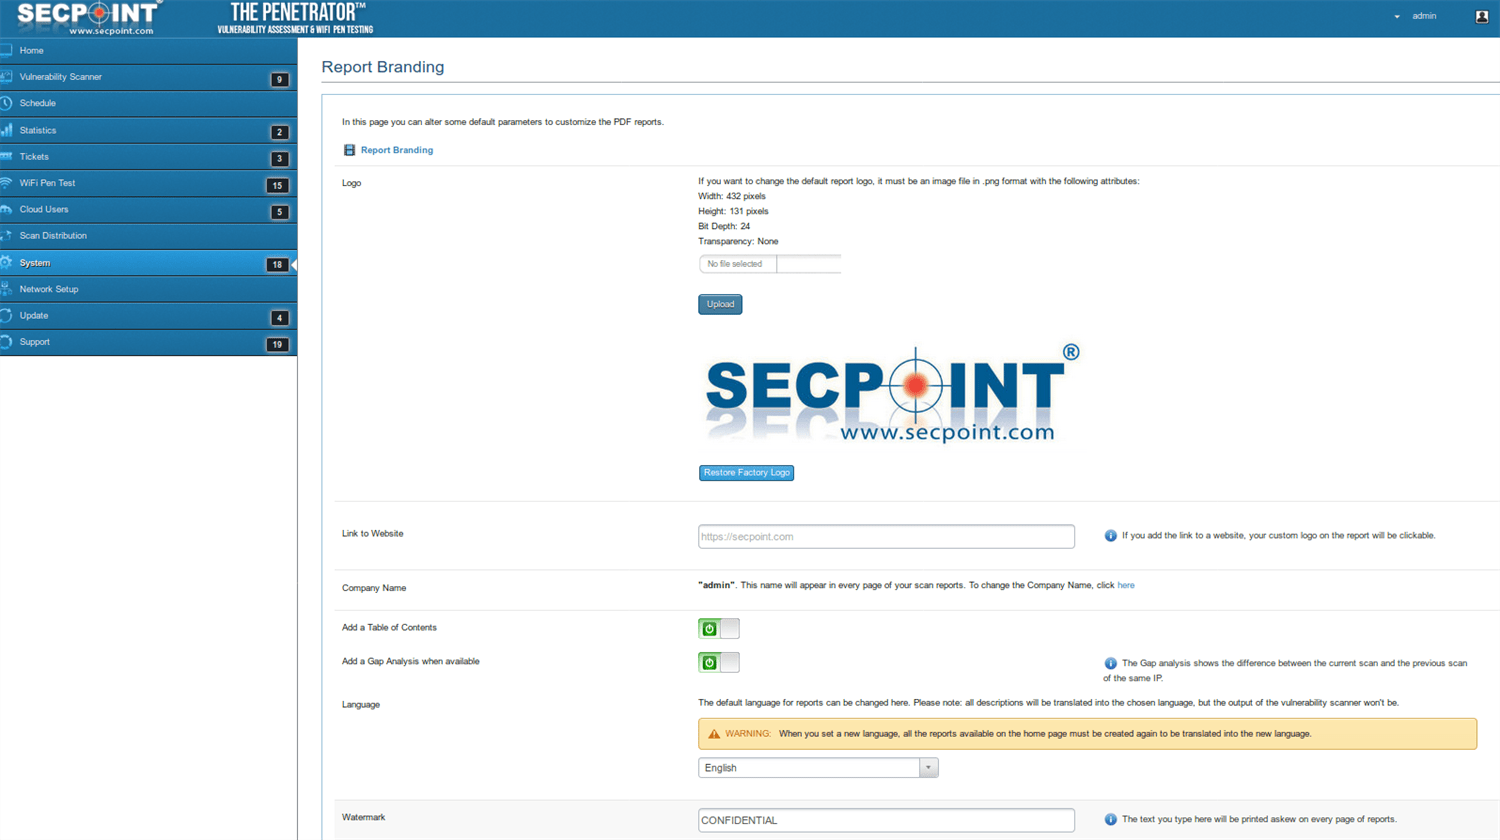 SecPoint Penetrator S9 - 64 IP Concurrent Scan License 1 Year Renewal - SecPoint